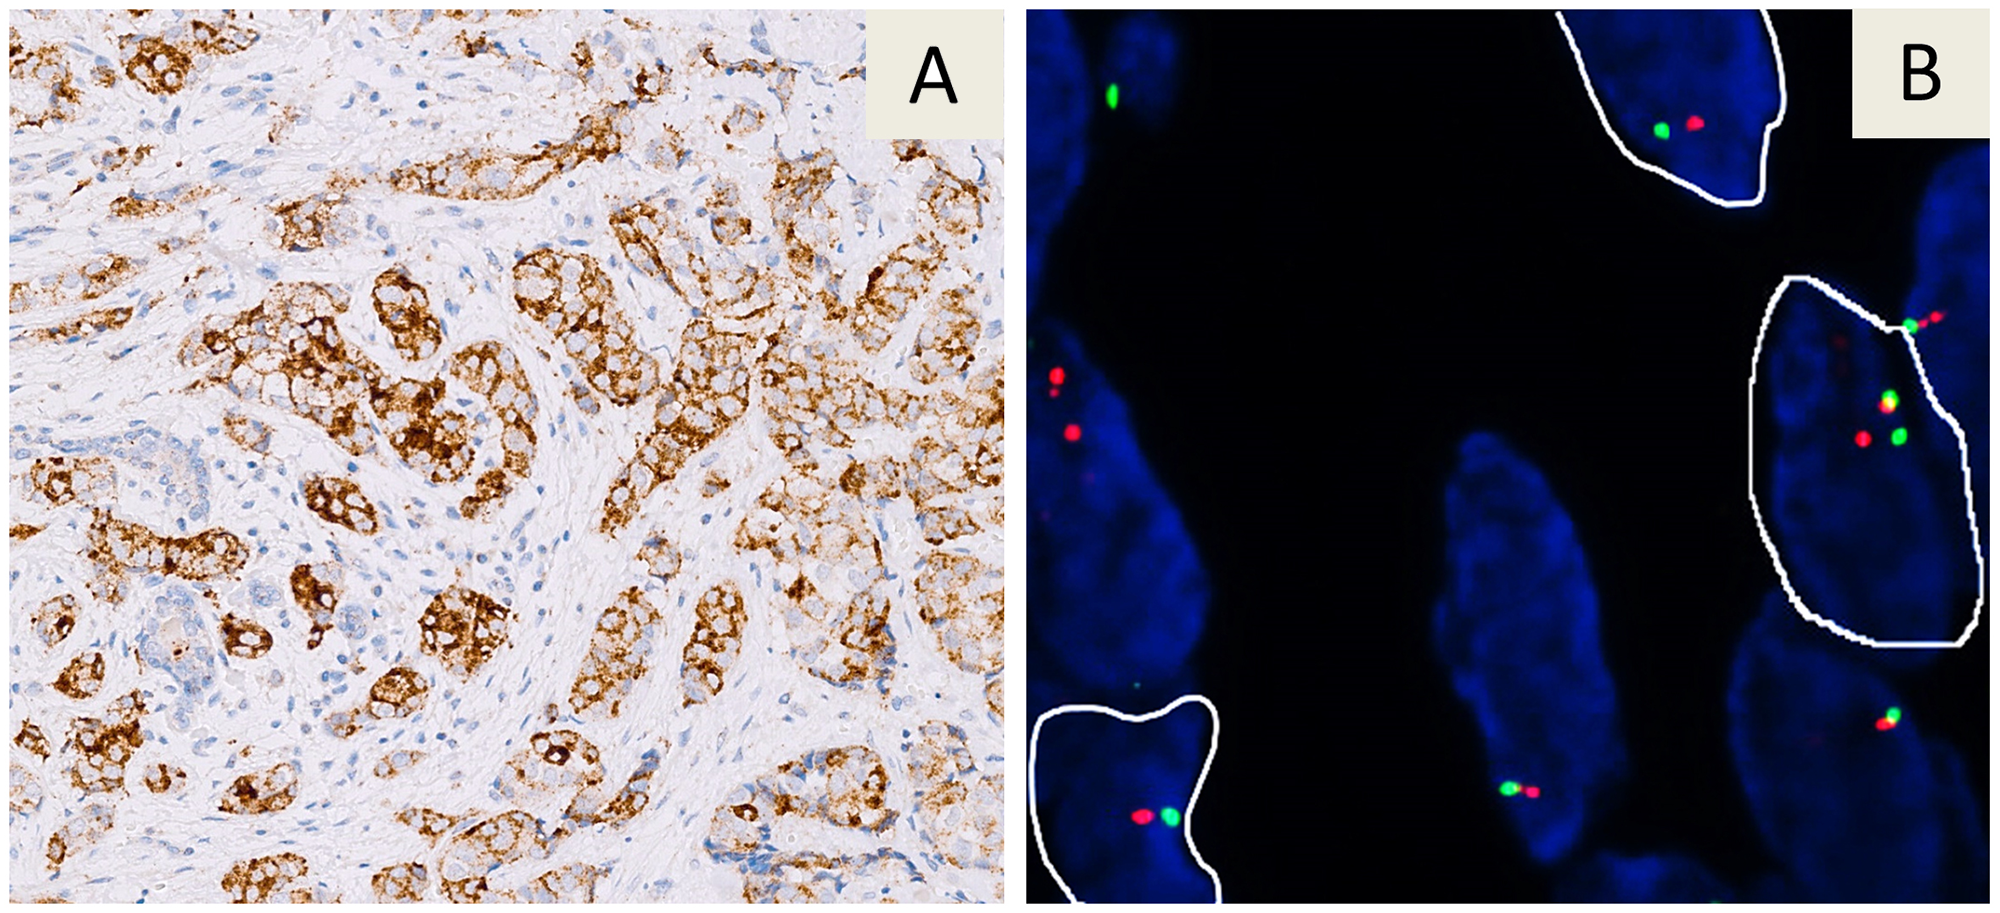 Immunohistochemical staining with the VENTANA pan-TRK (EPR17341) assay in a breast carcinoma.